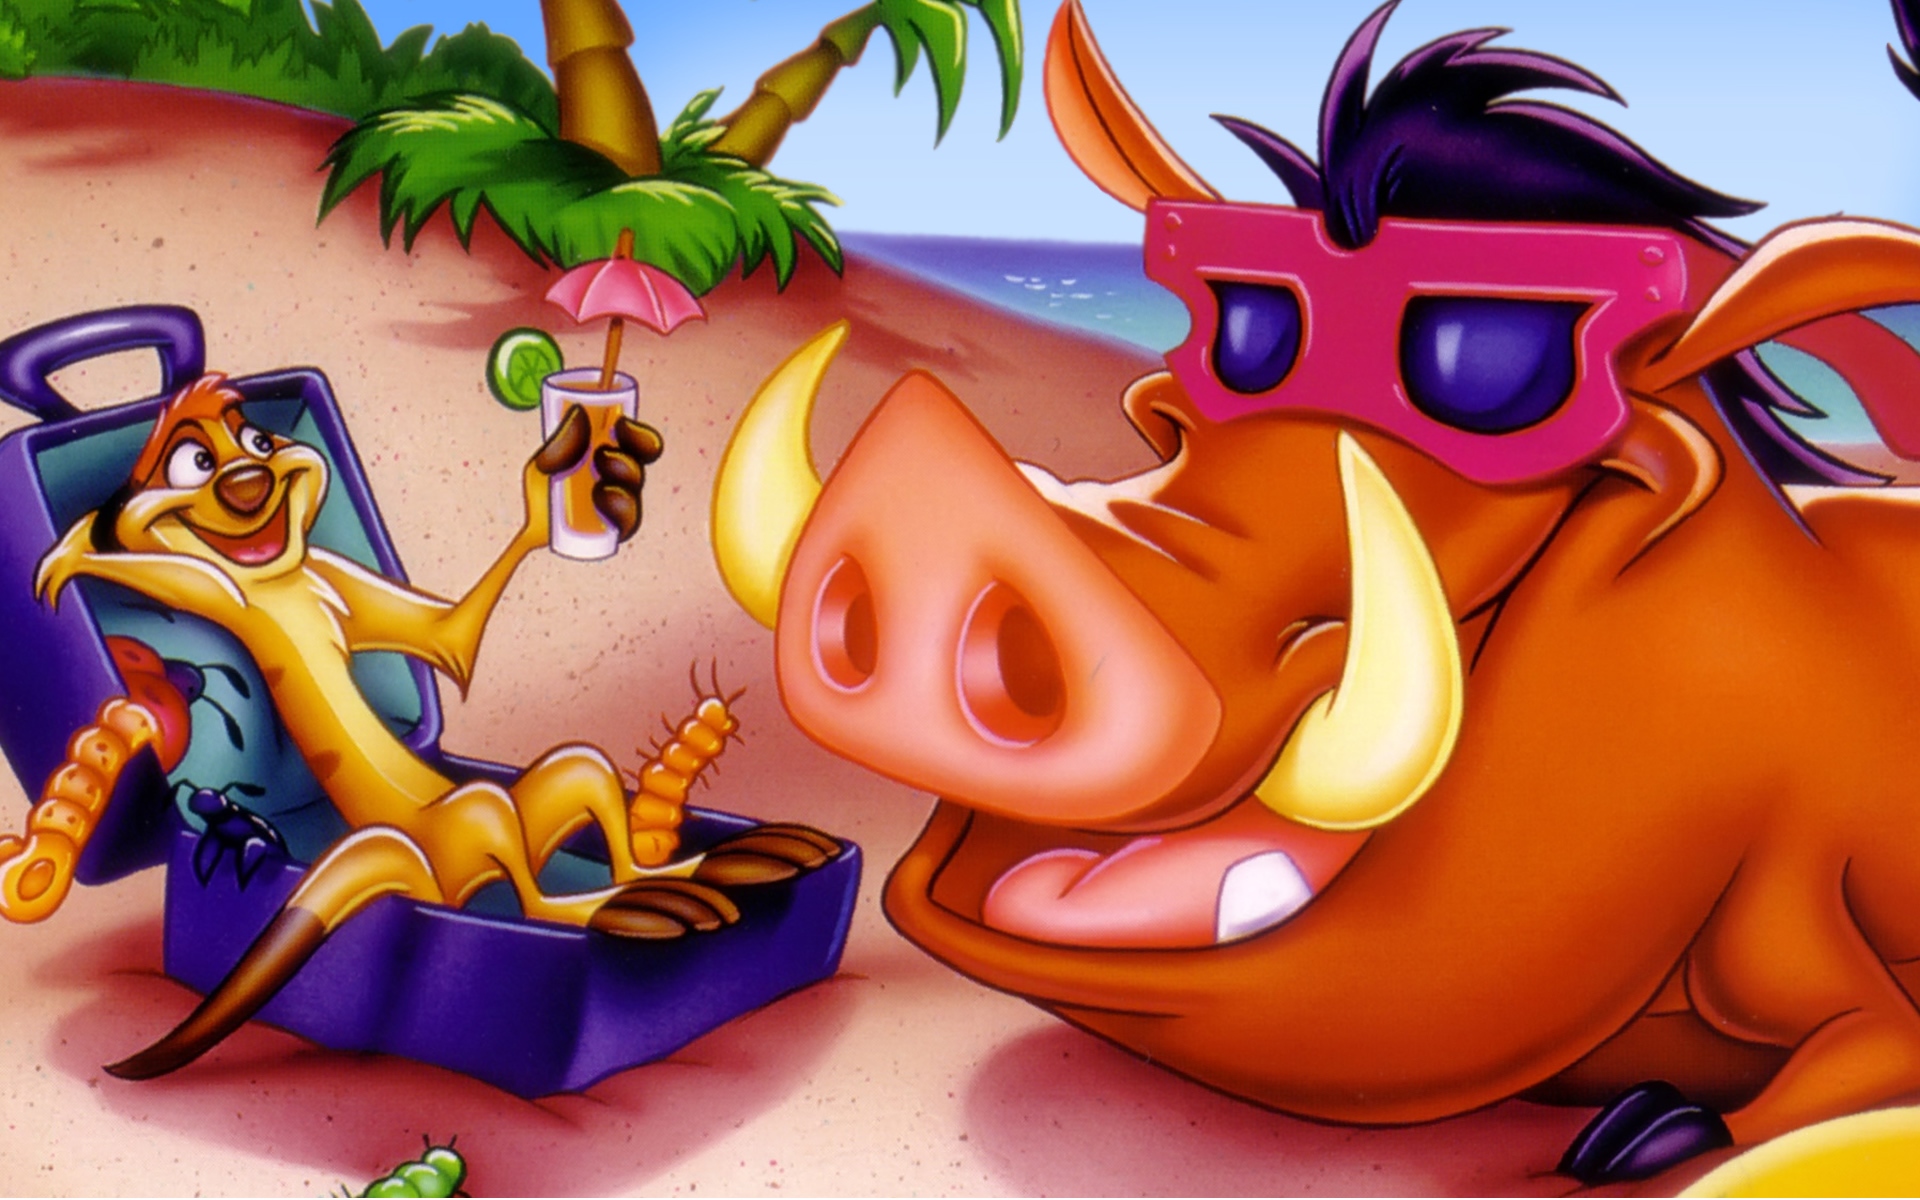 Timon & Pumbaa - Mickey Mouse Pictures.